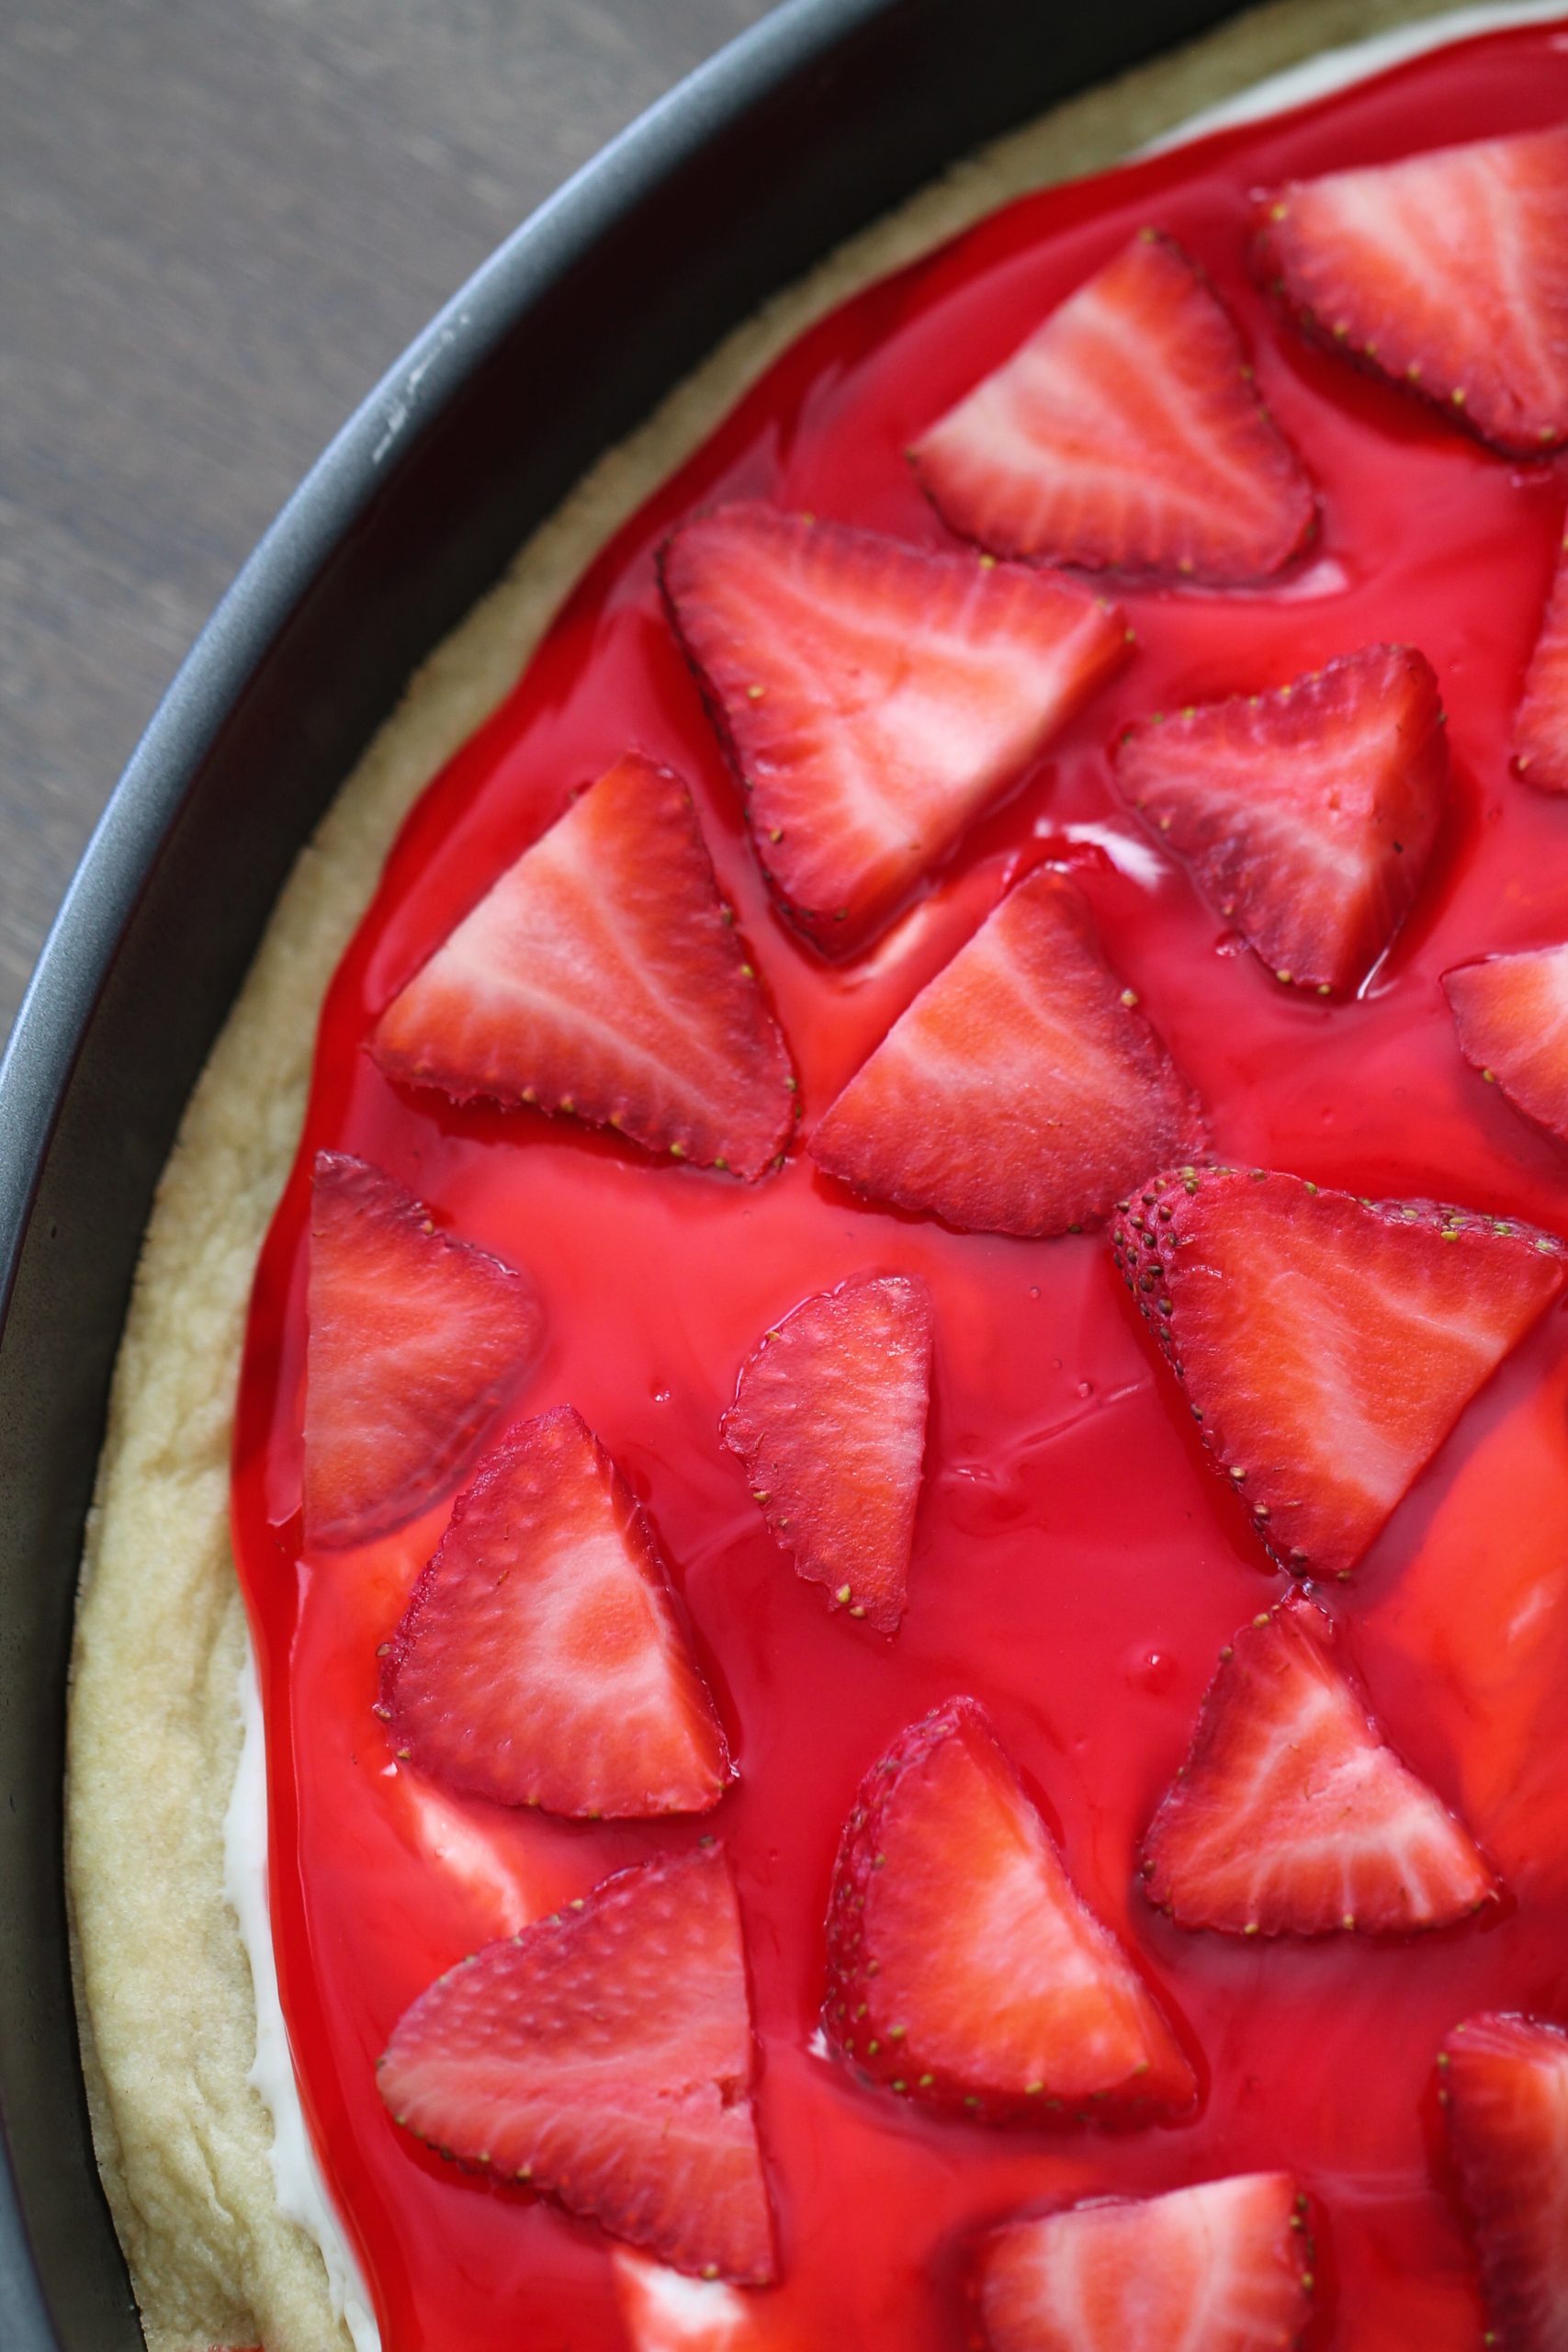 Strawberry layer added to pan